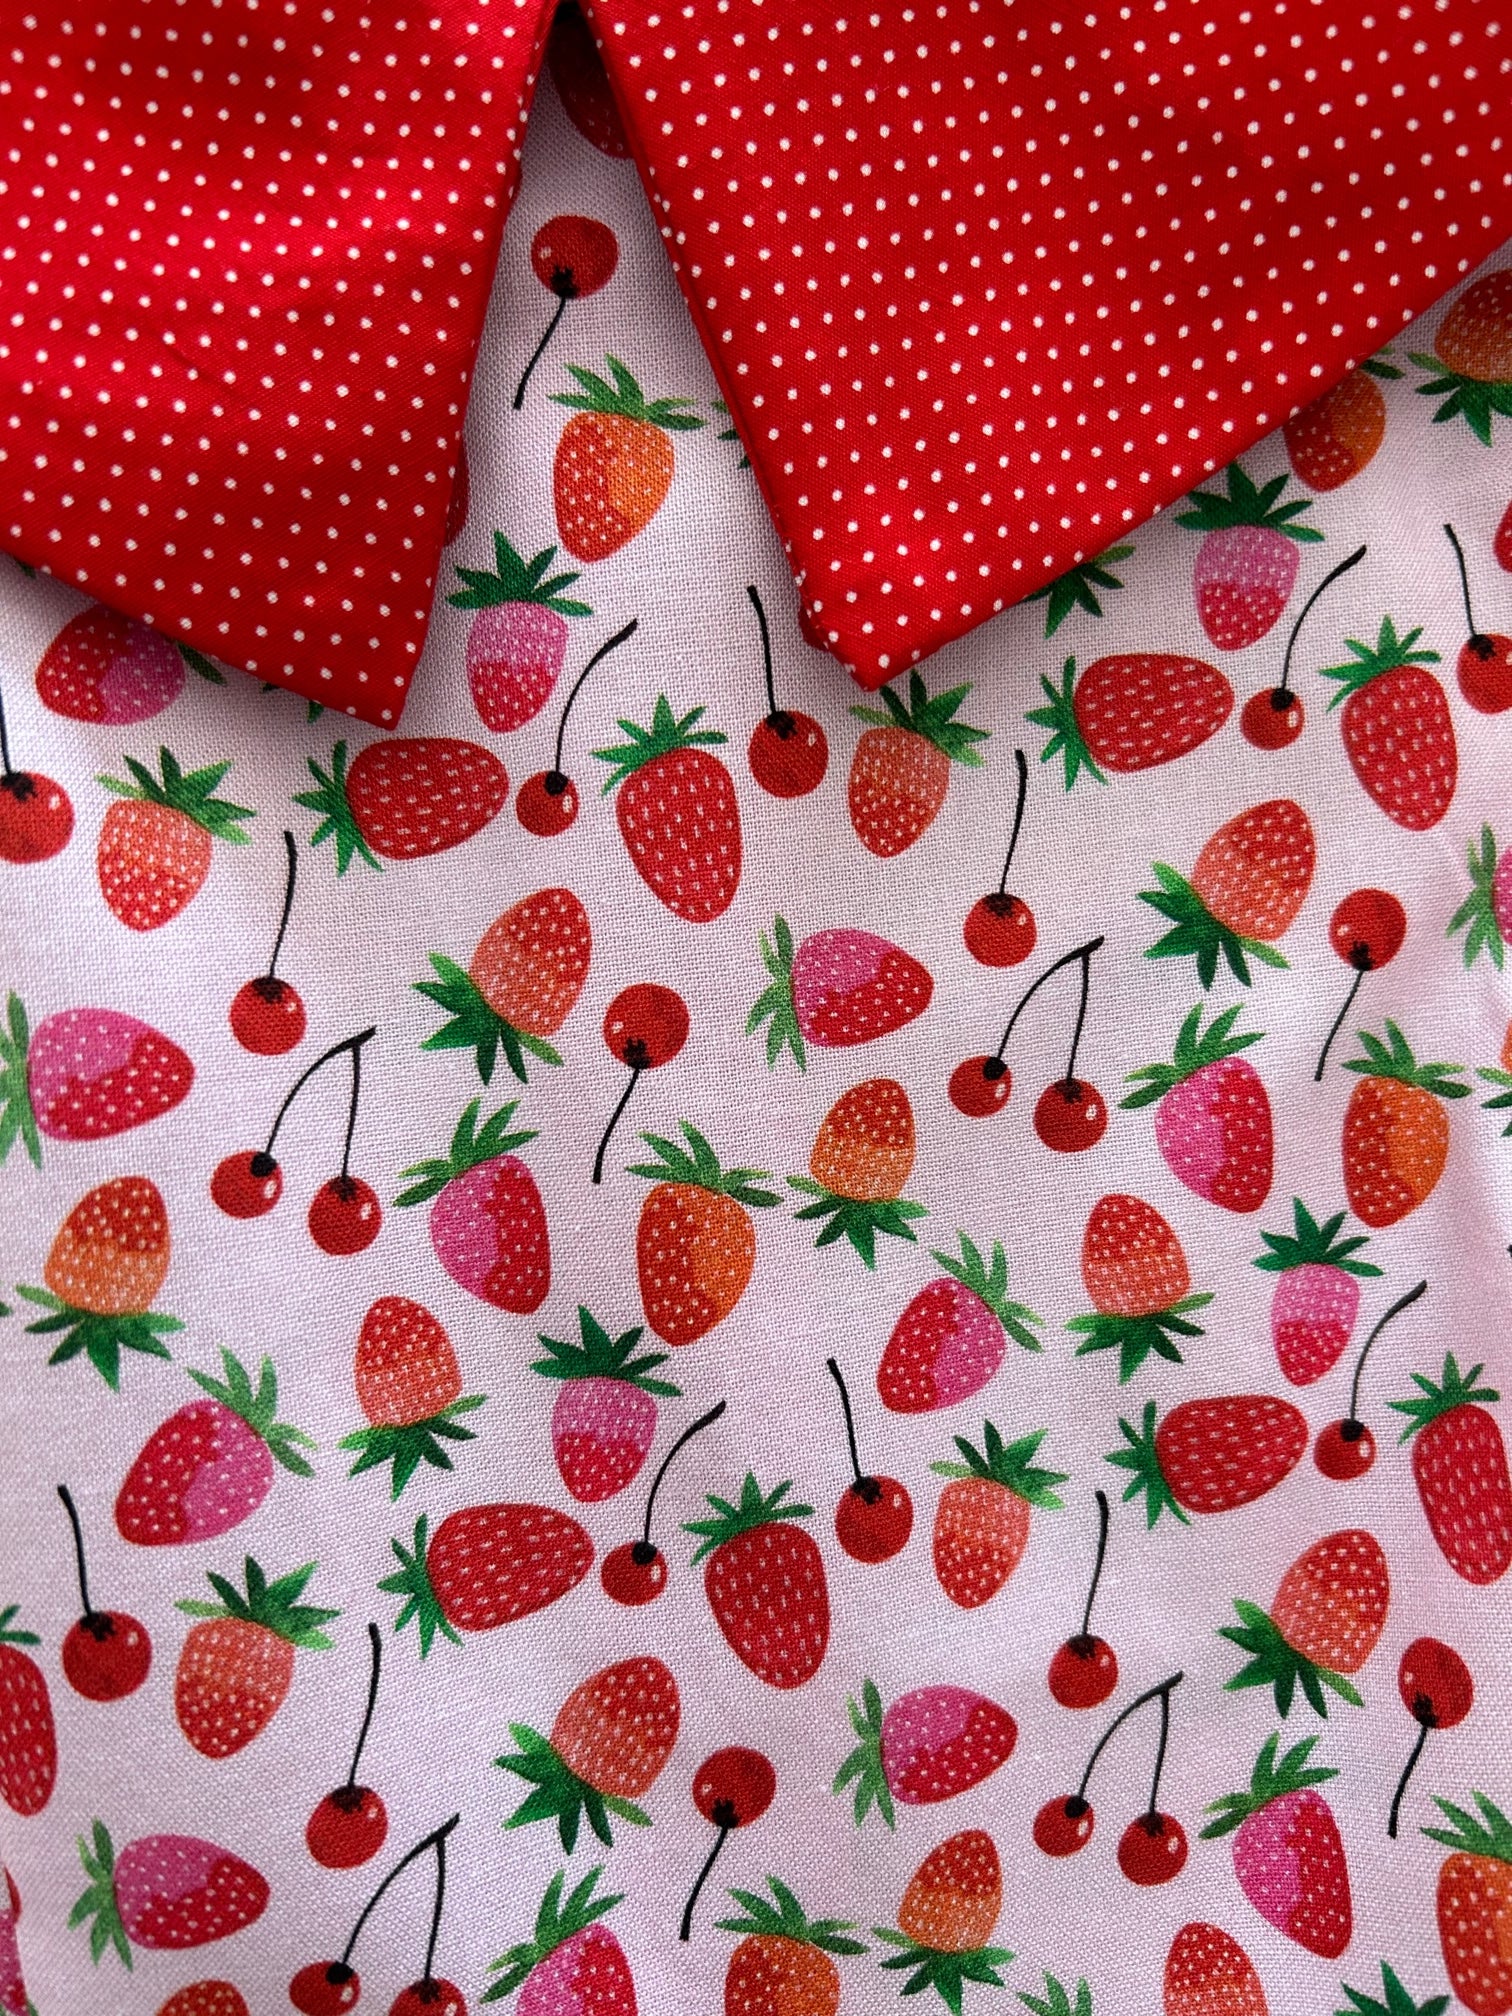 a close up of the fabric showing cherries and strawberries and the polka dot collar detail